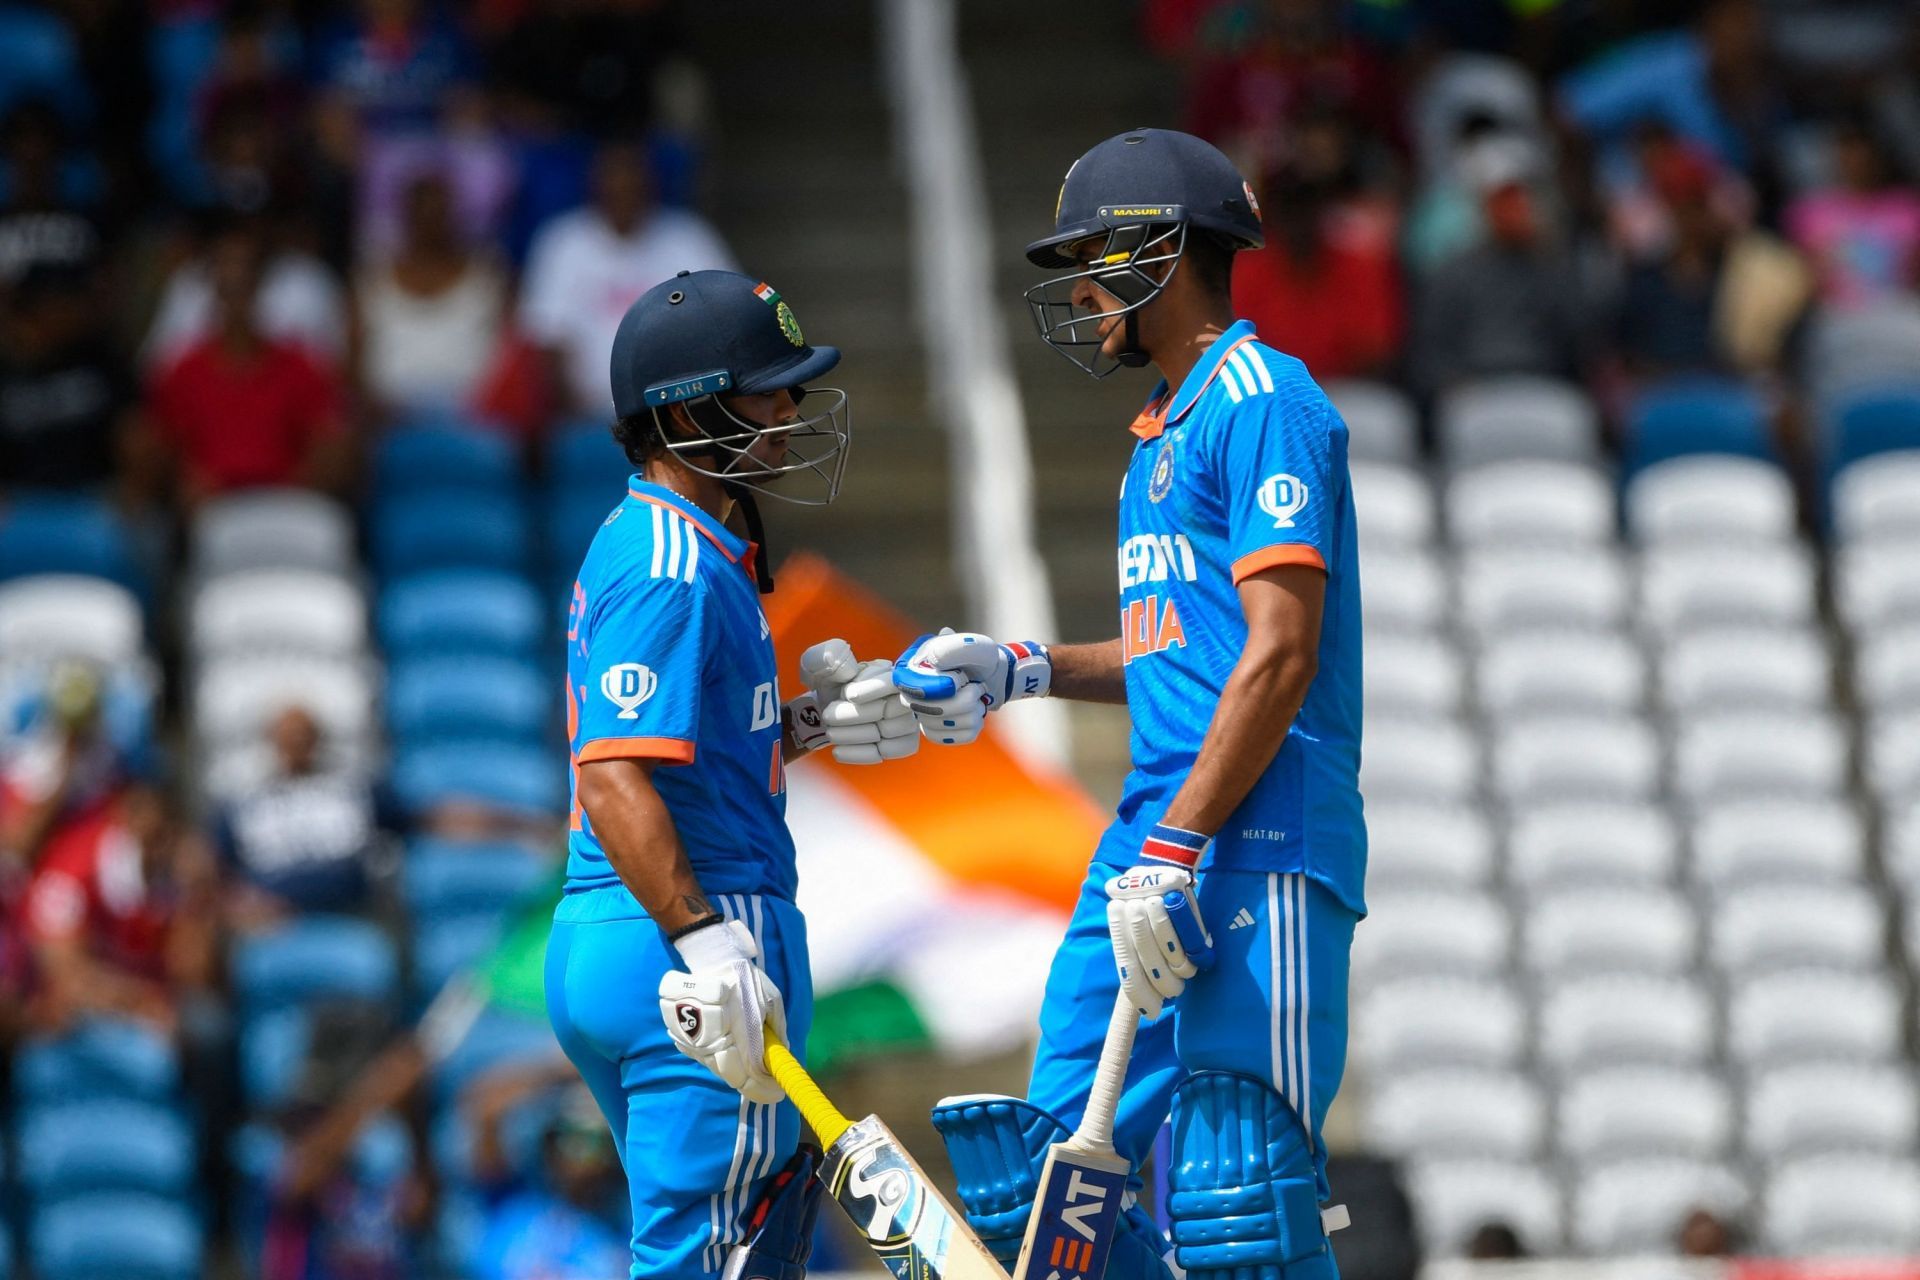 Ishan Kishan and Shubman Gill opened for India in the first two T20Is against the West Indies. [P/C: BCCI]